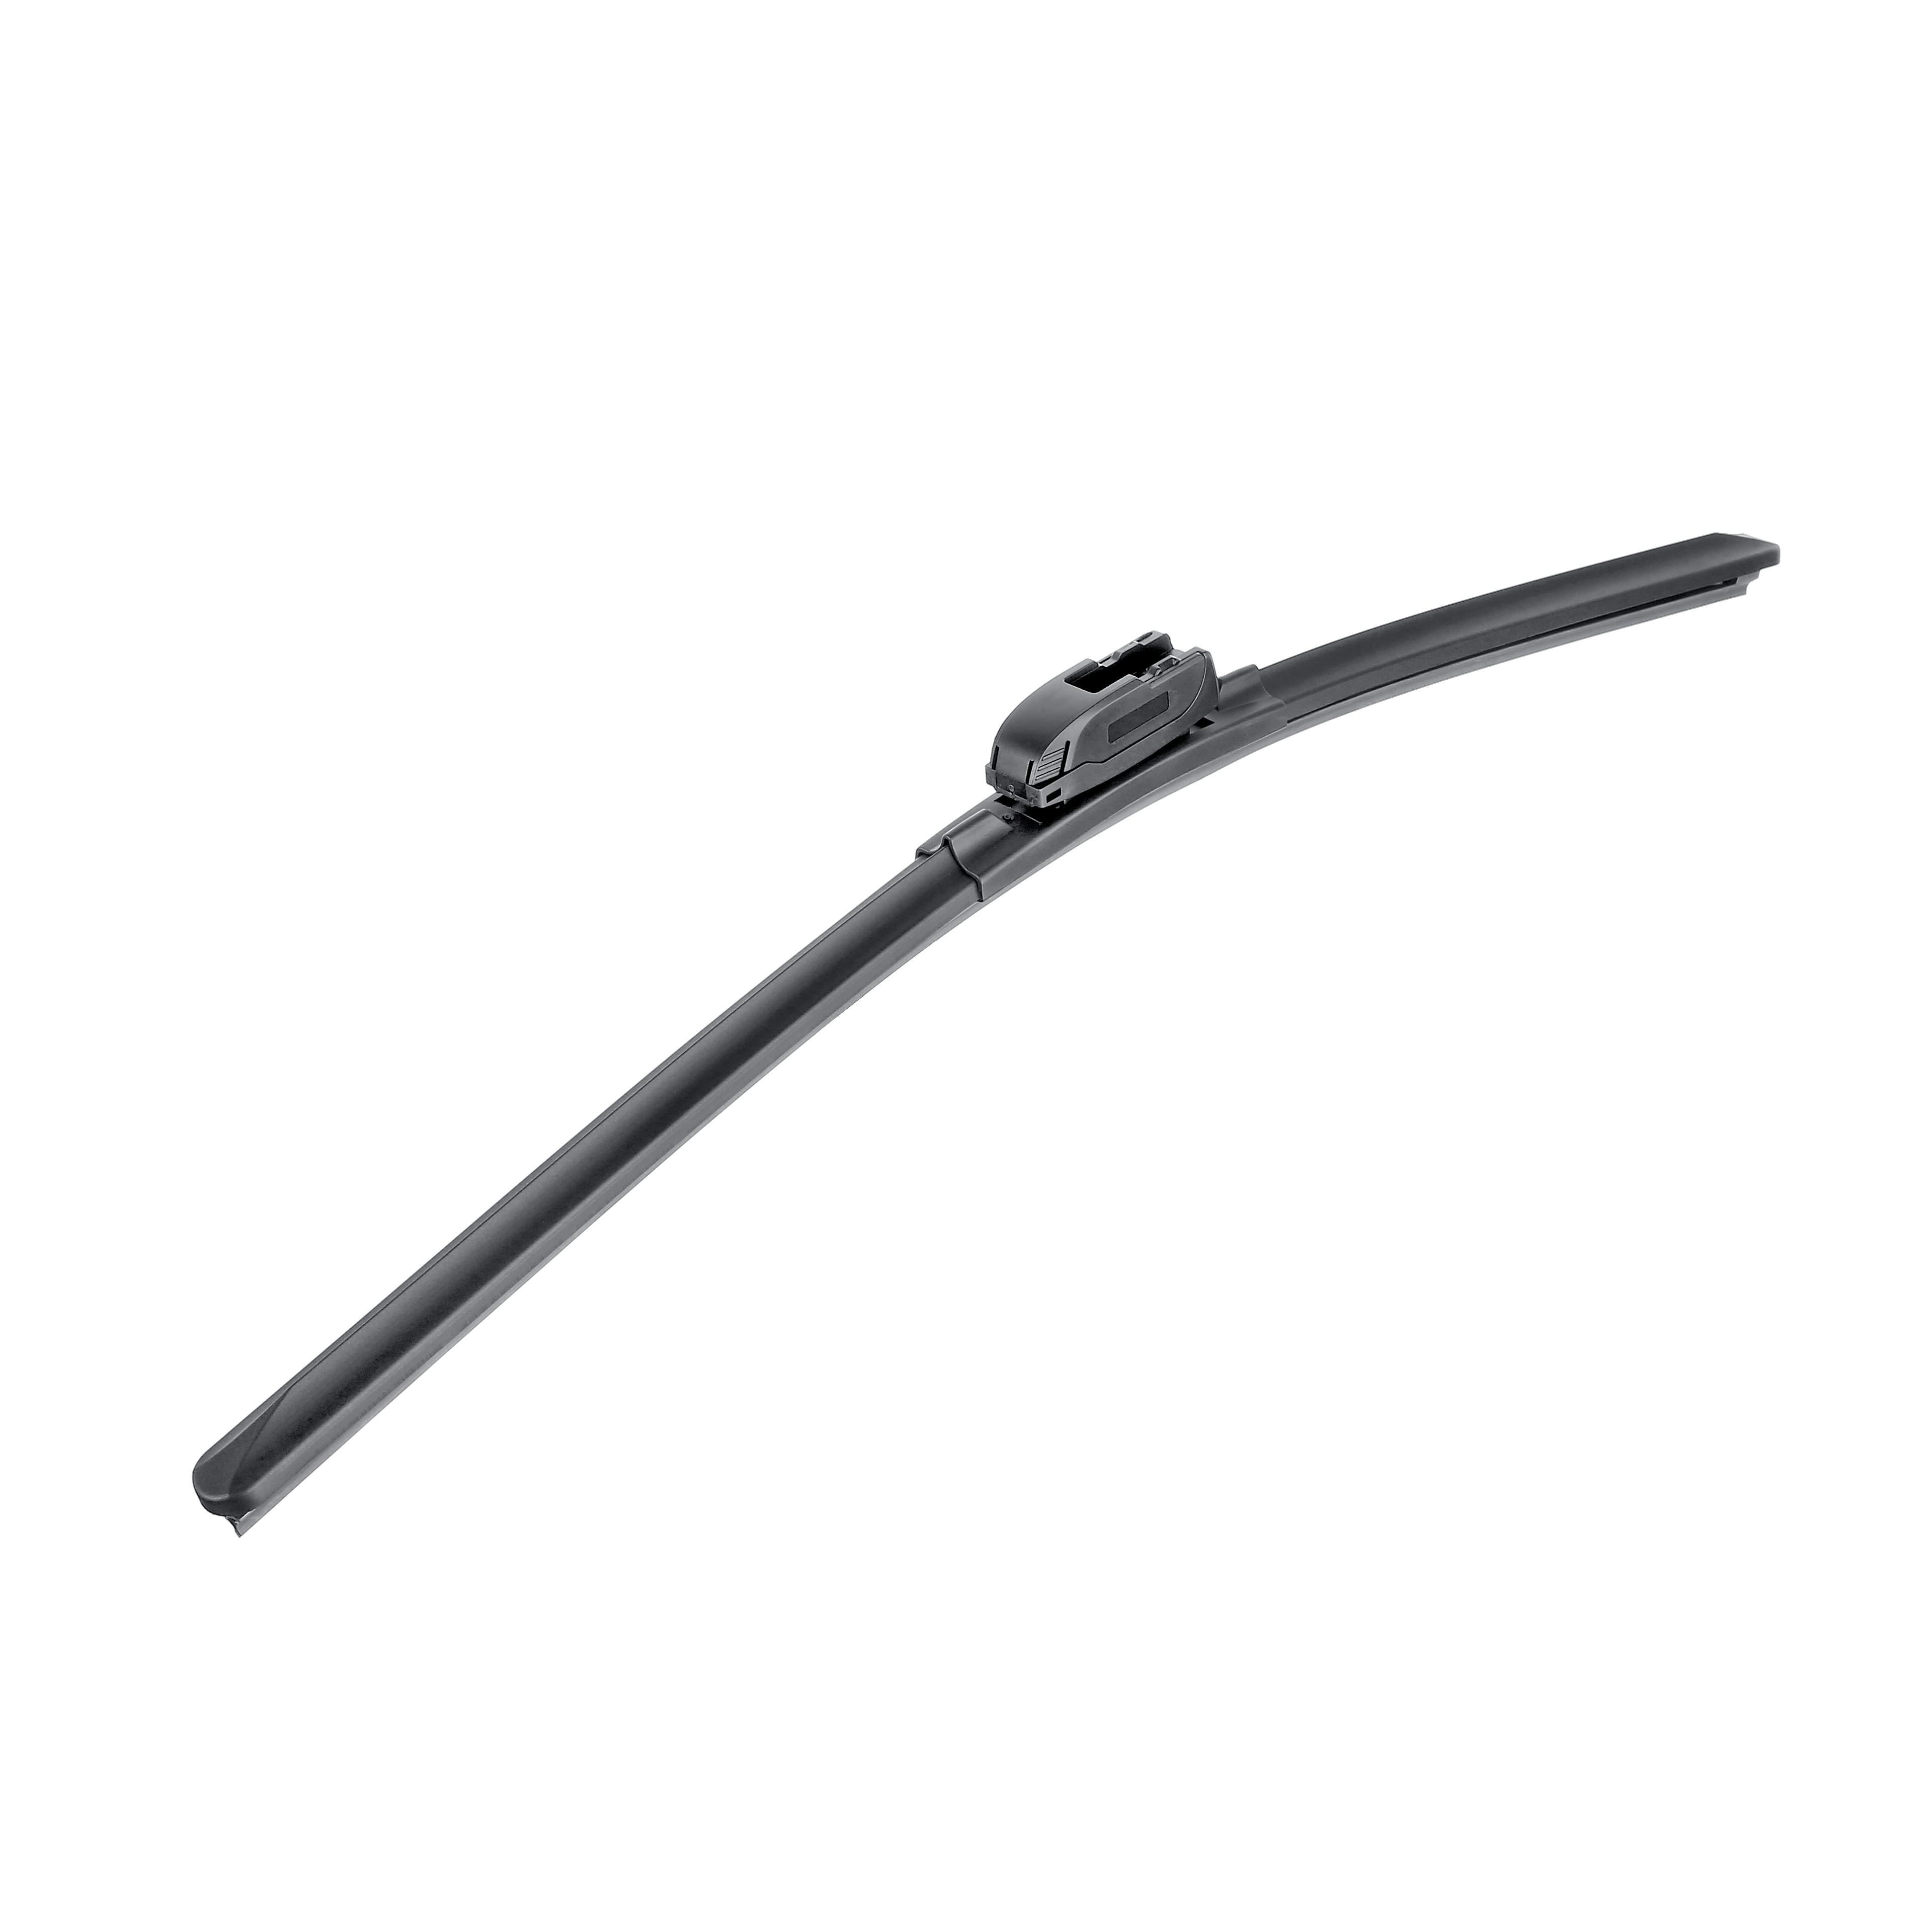 One of Hottest for Metal Windshield Wipers - Chinese windshield beam wiper blade with multi-adapters  – So Good